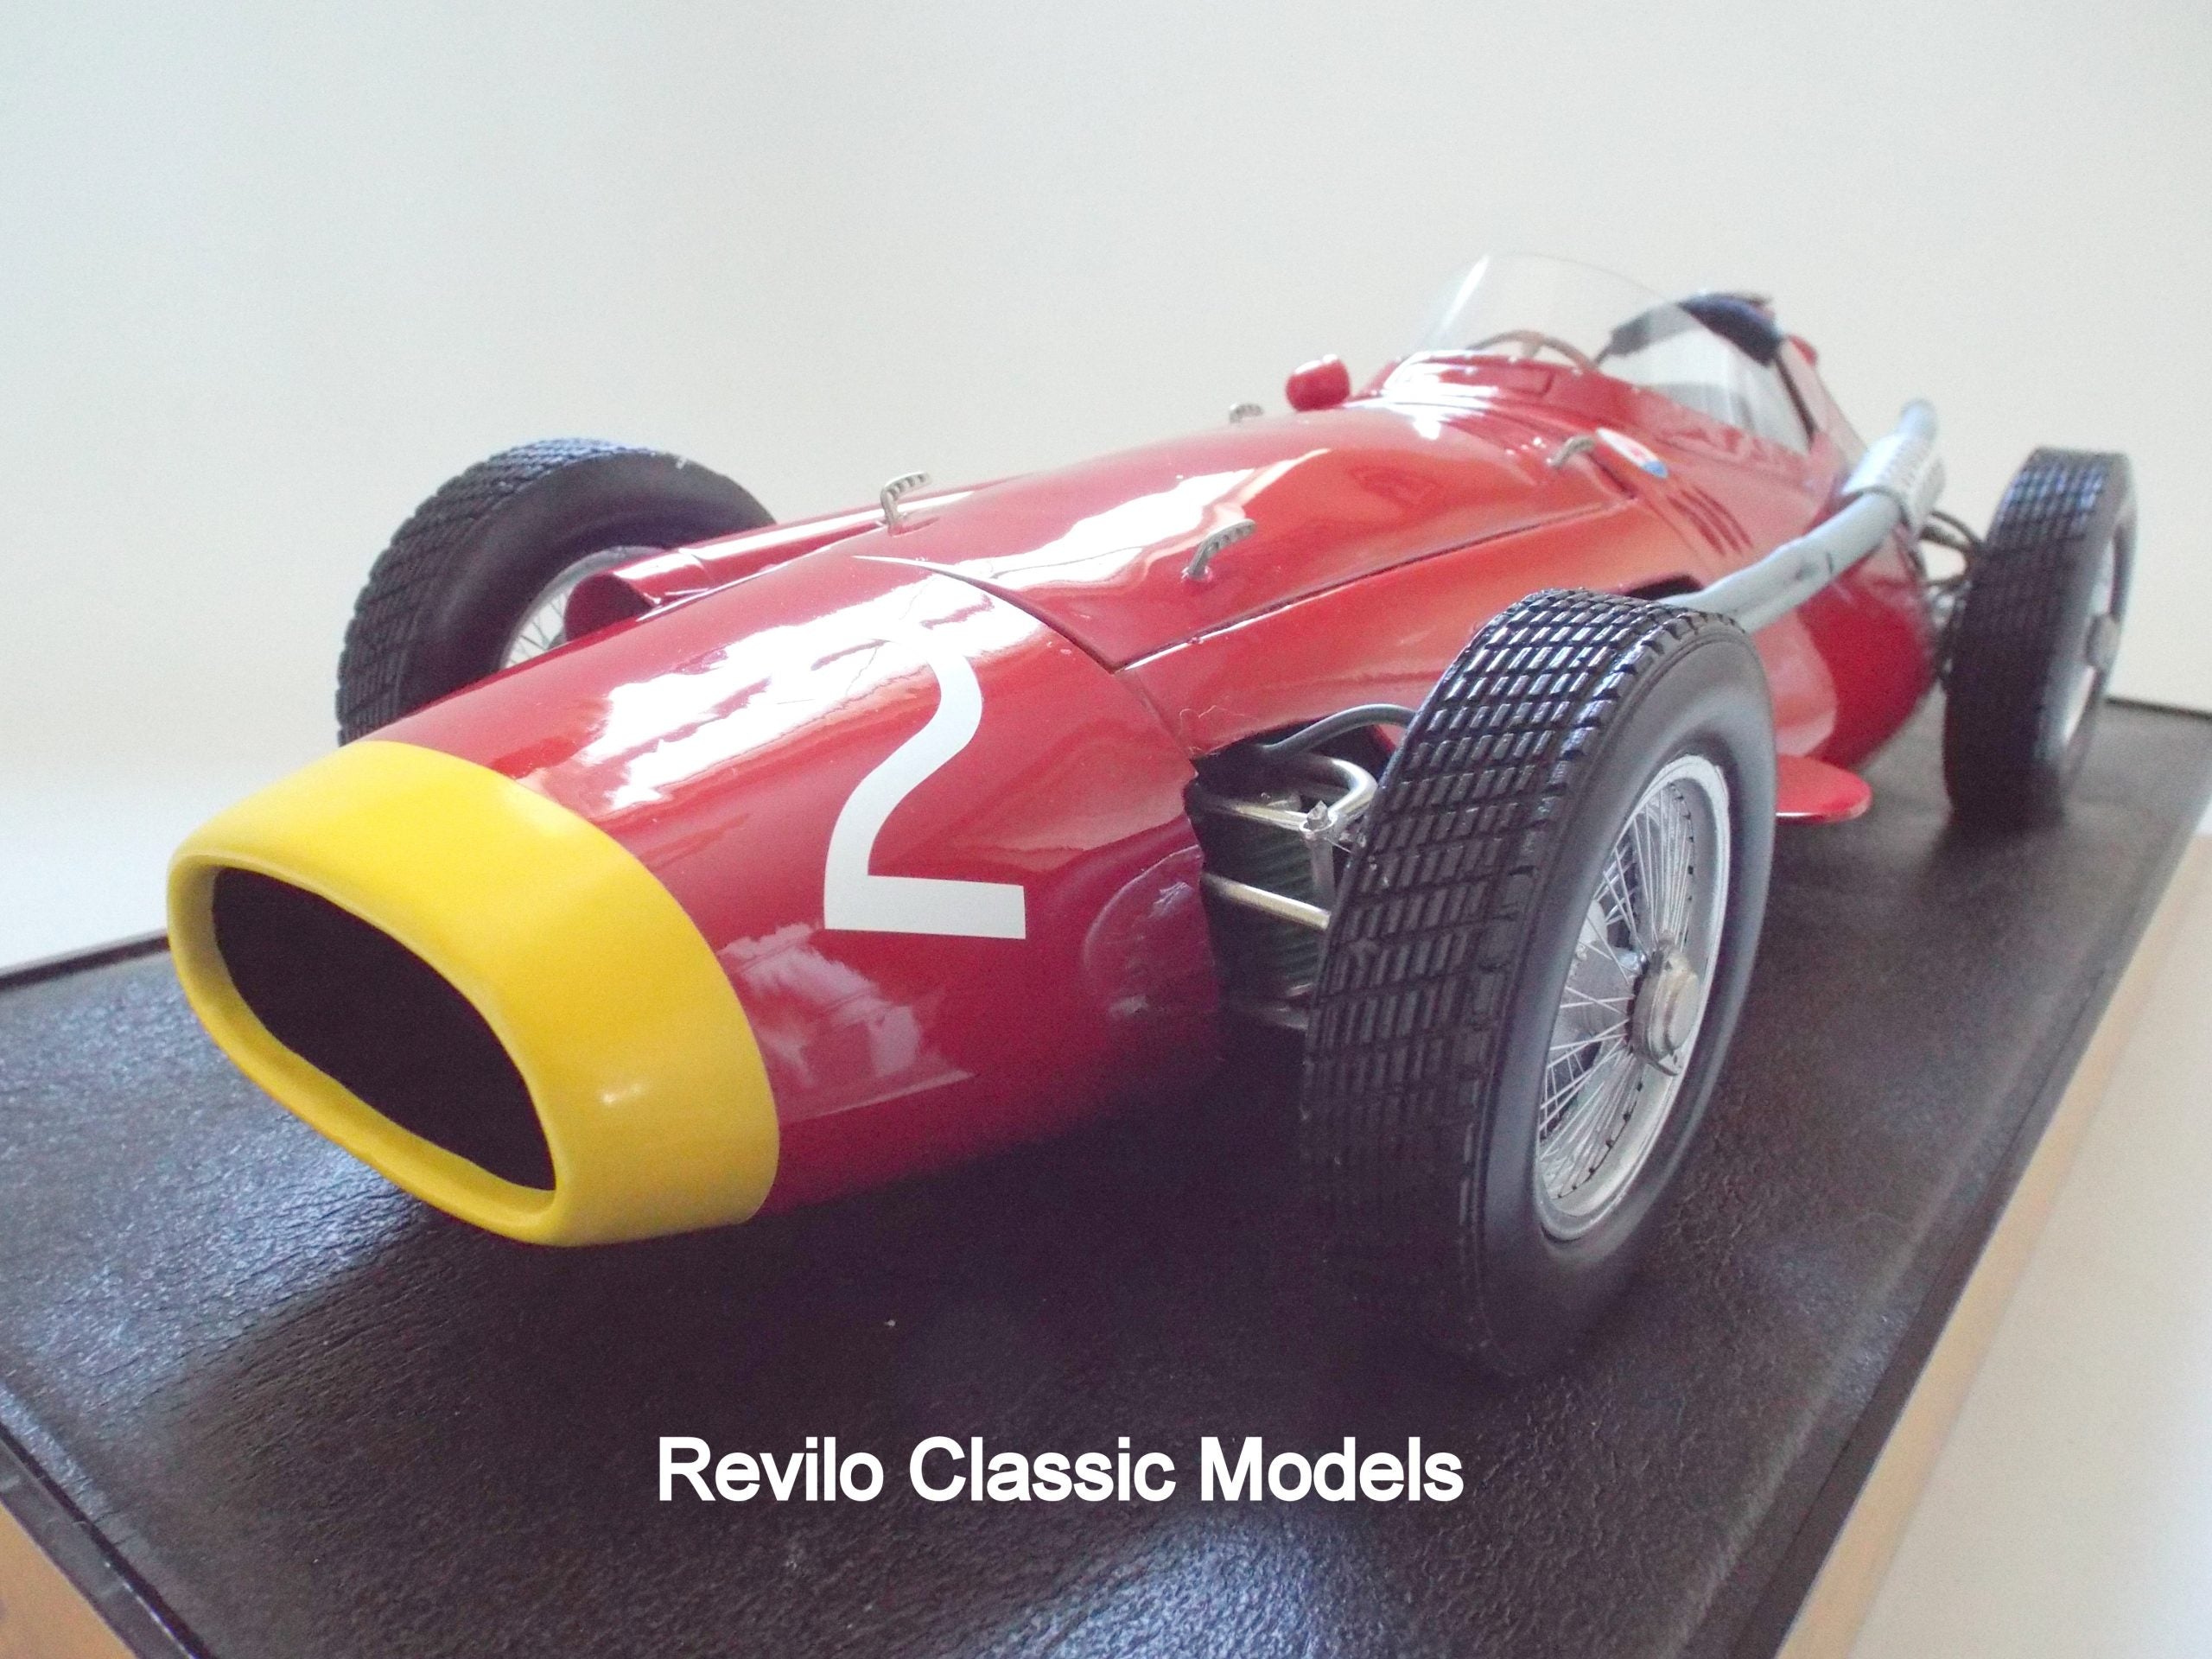 Maserati 250F 1:8 Scale by Javan Smith